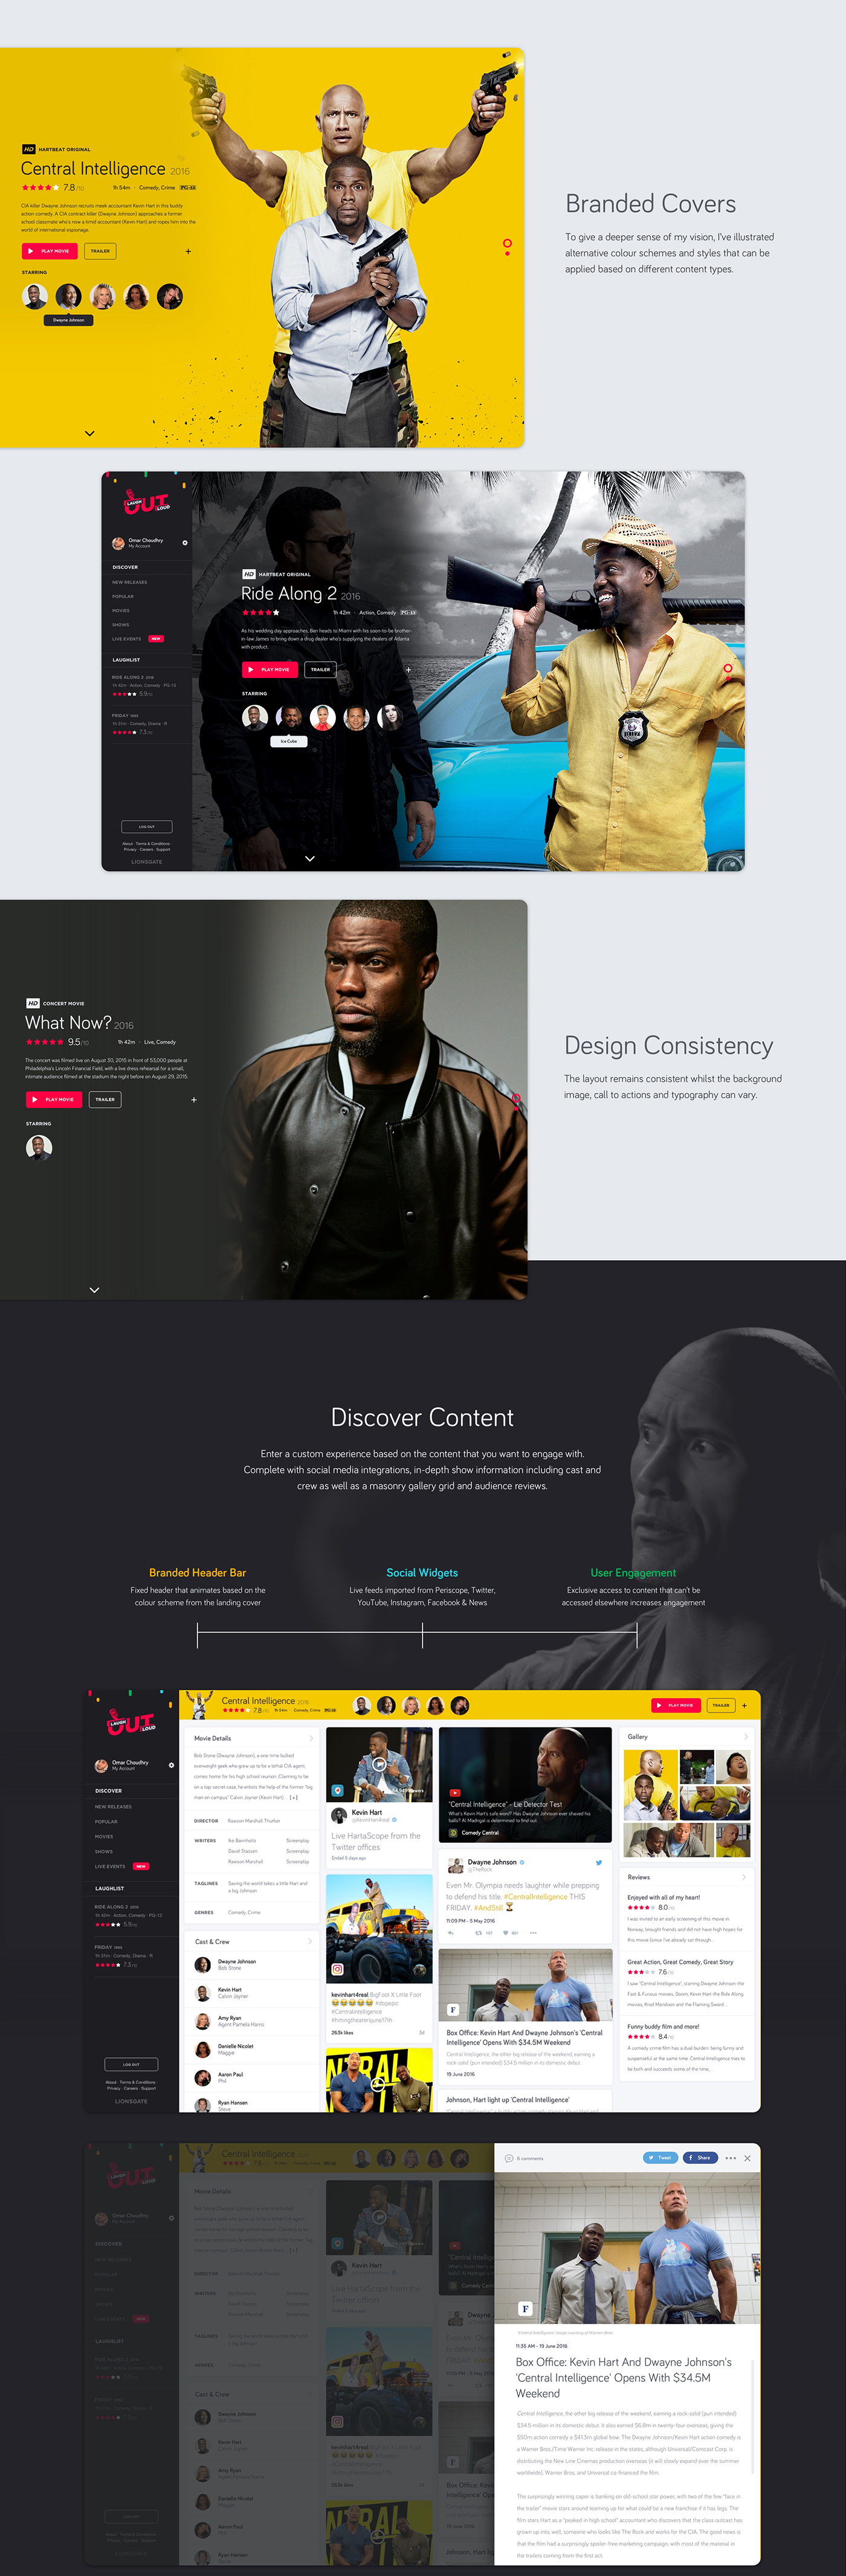 kevin hart  design concept Laugh Out Loud dashboard movie network profile design design omar choudhry user interface user experience